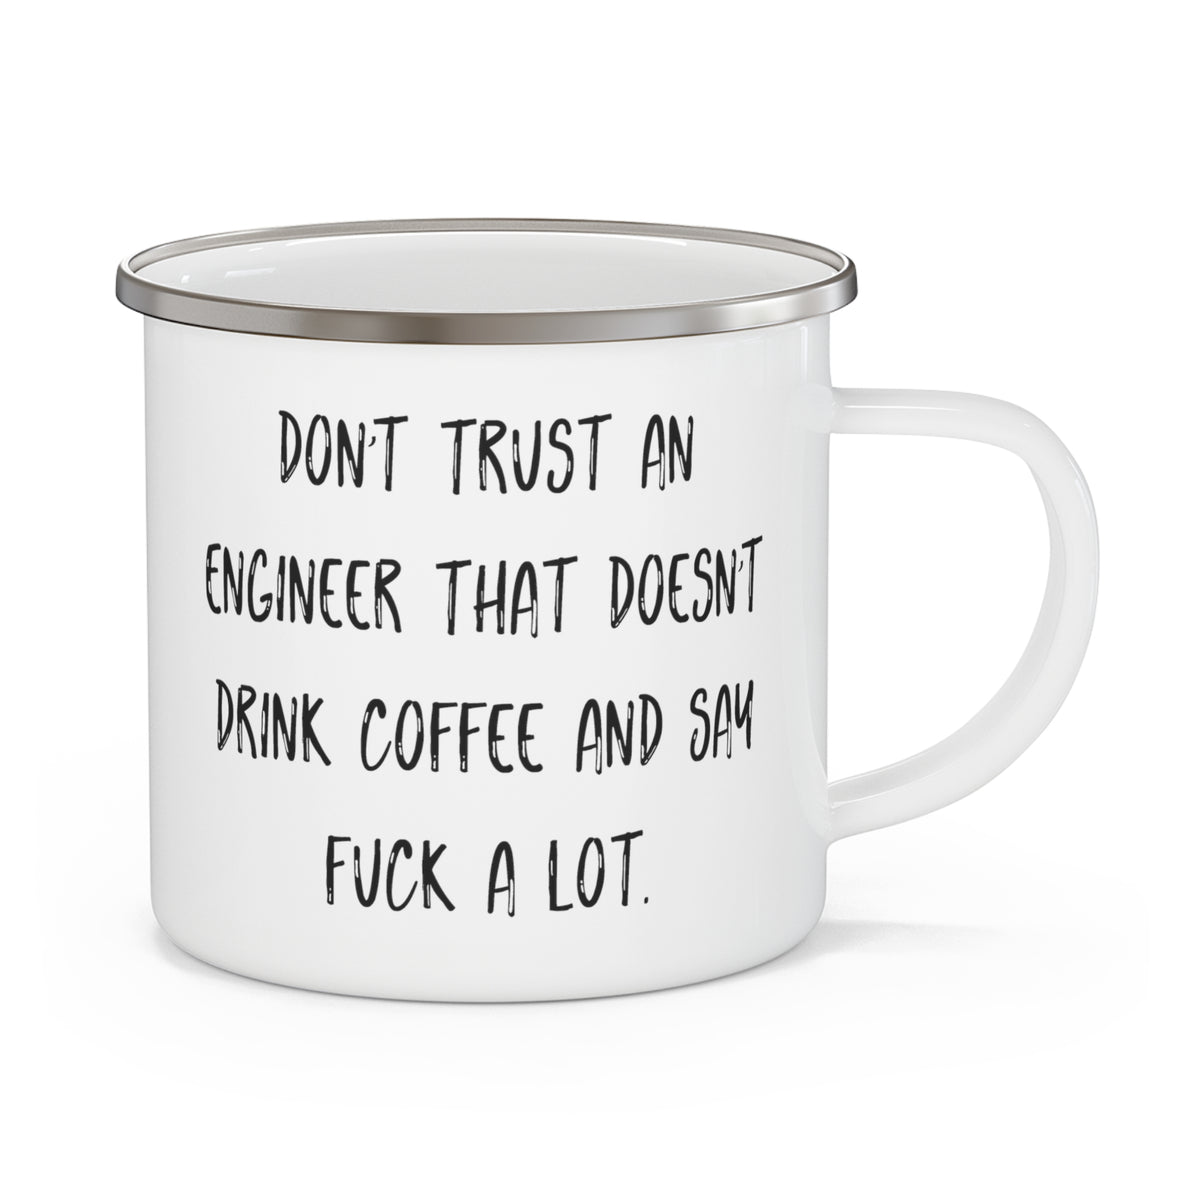 Gag Engineer Gifts, Don't Trust an Engineer That Doesn't Drink Coffee and Say, Inspire 12oz Camper Mug For Friends From Friends, Humor, Laugh, Gag, Present, Gift idea